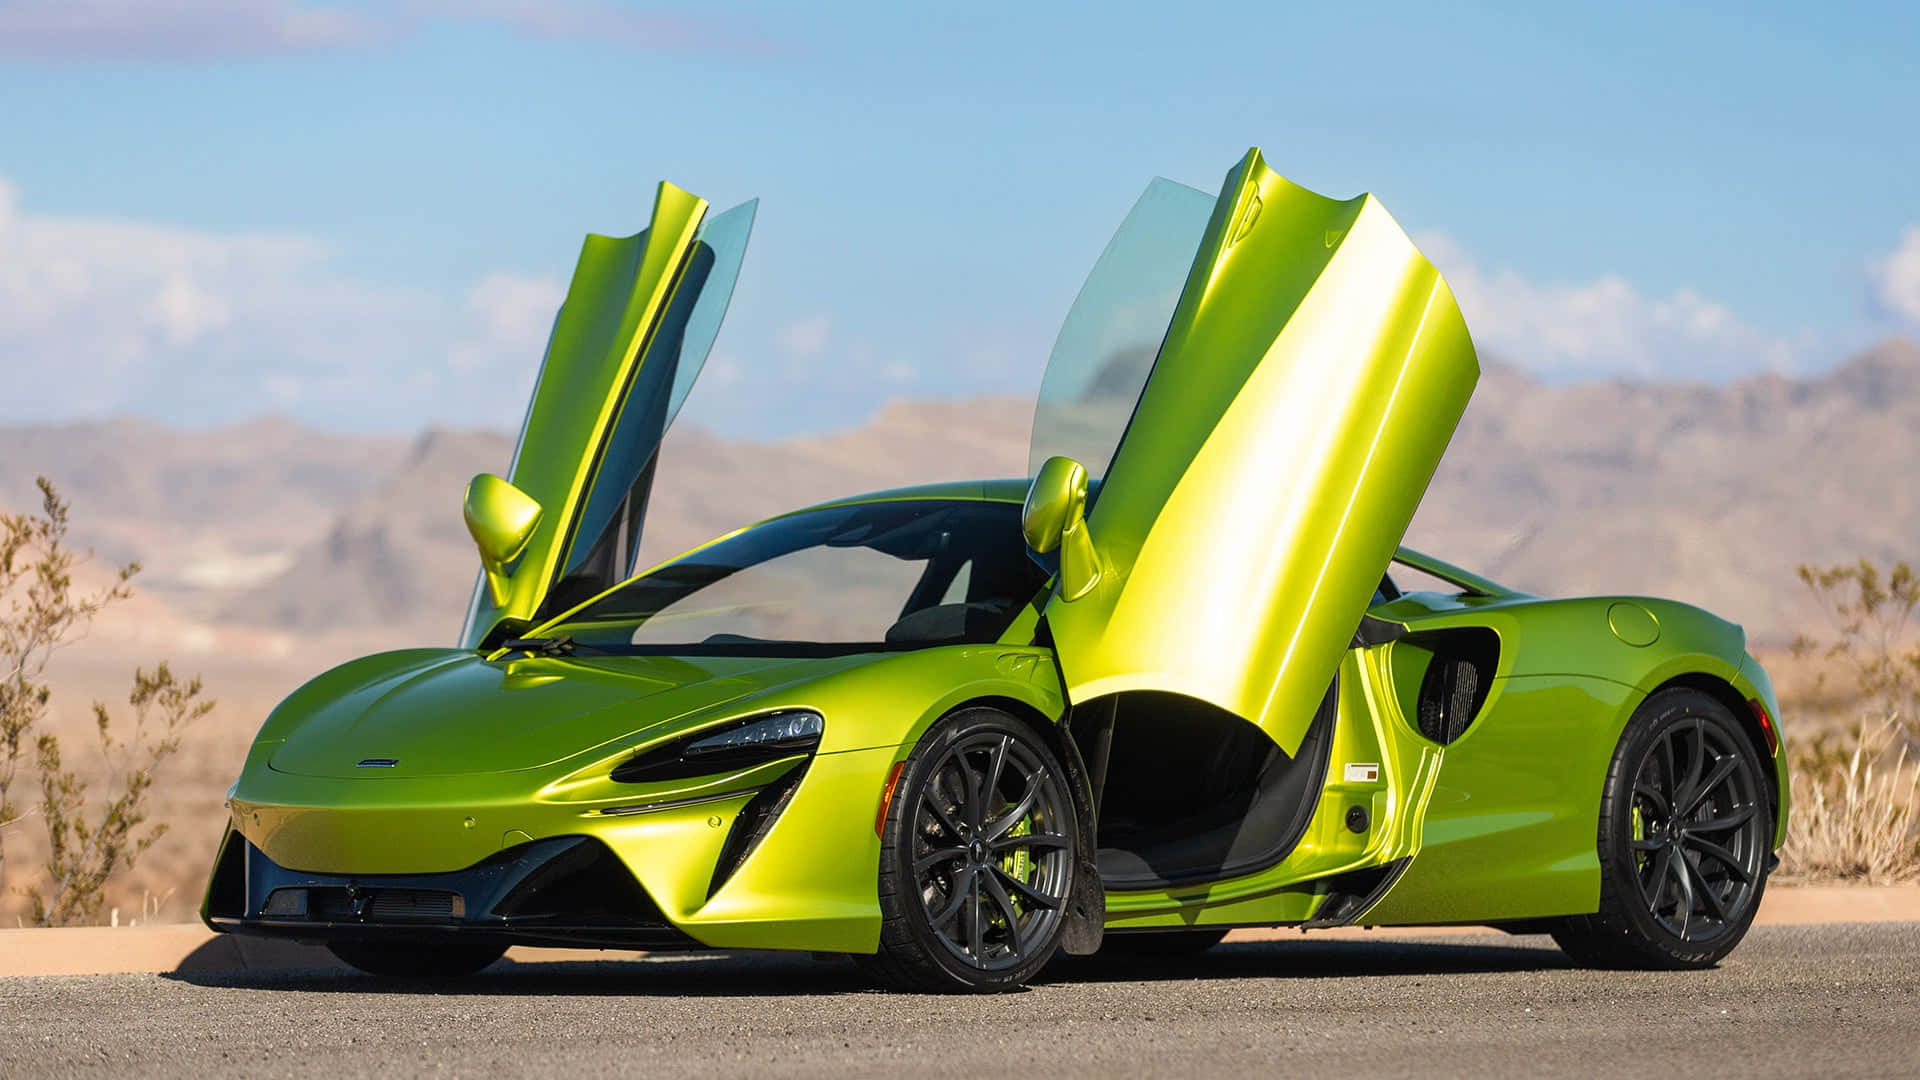 Feel the power with Lofty and Soulful Driving Experience in McLaren